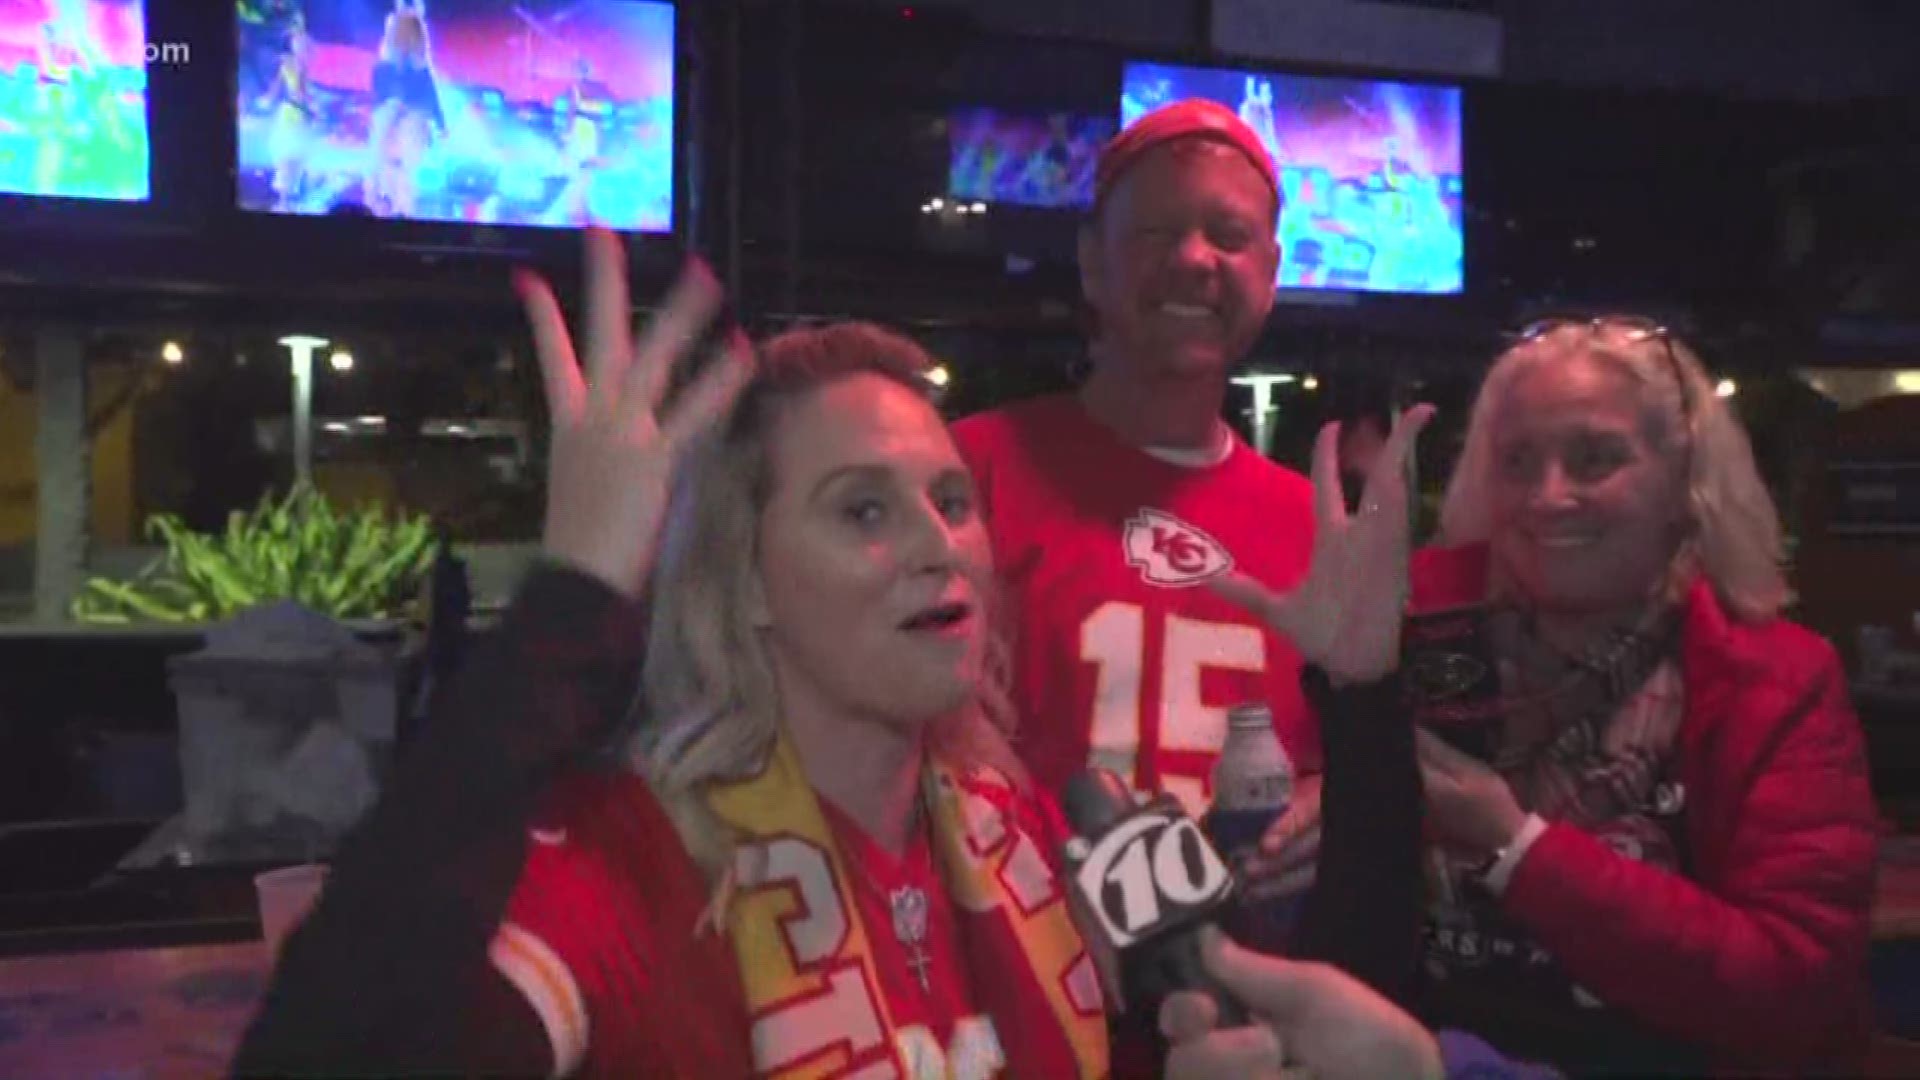 Super Bowl 54 is over and that means Tampa Bay is on the clock! But right now, football fans are celebrating all across Tampa Bay after the Chiefs won!